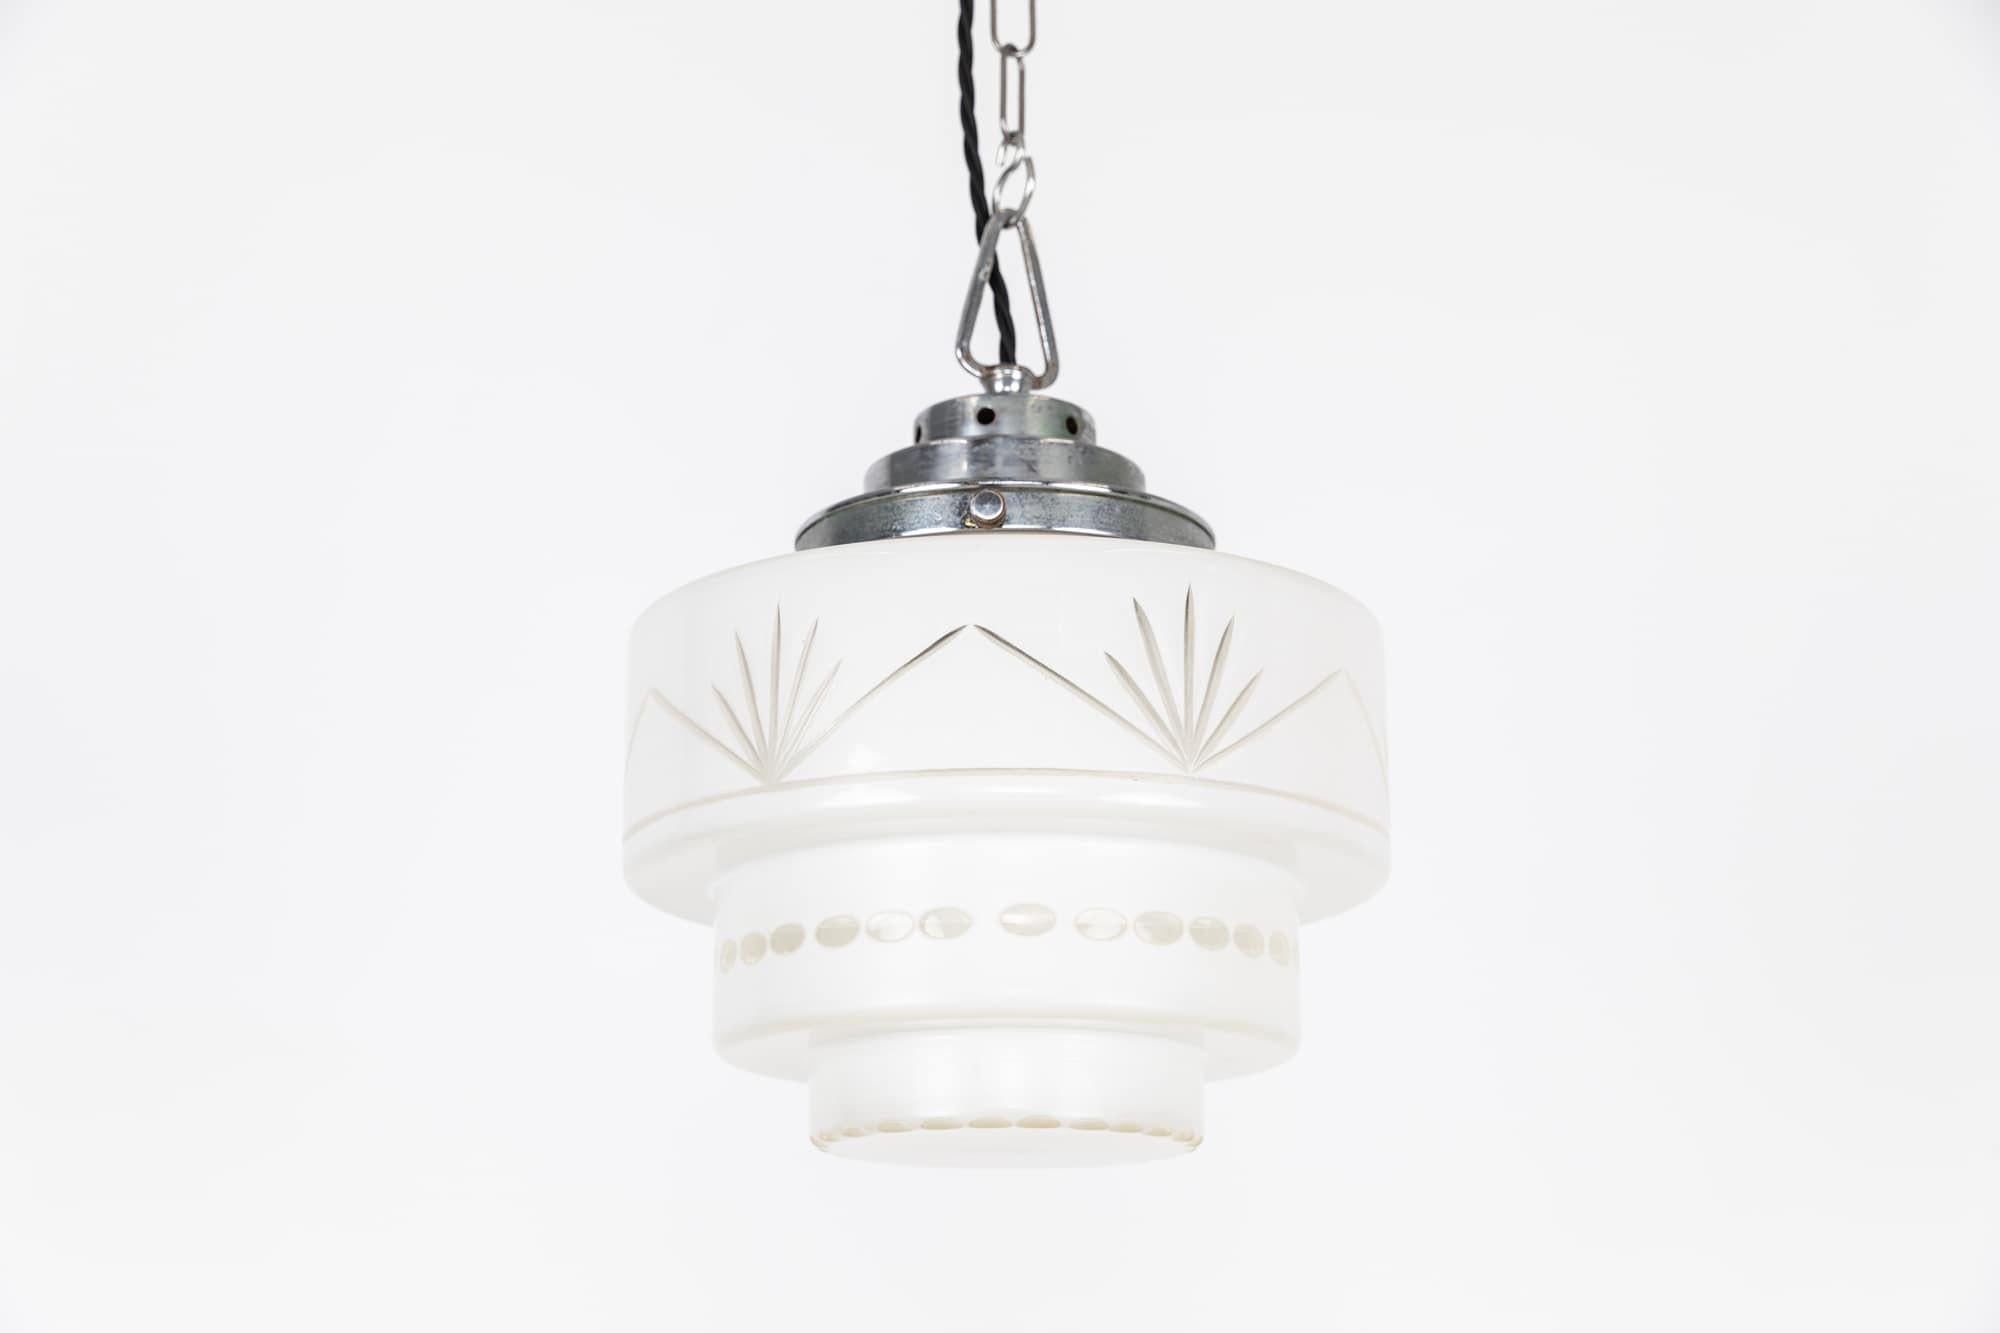 

An elegantly formed cut glass art deco opaline glass pendant light. c.1940

Made by GEC to their usual high standard of quality. Original heavy duty chromed gallery supporting the cut glass cylindrical shade.

Rewired with 1m of black twisted